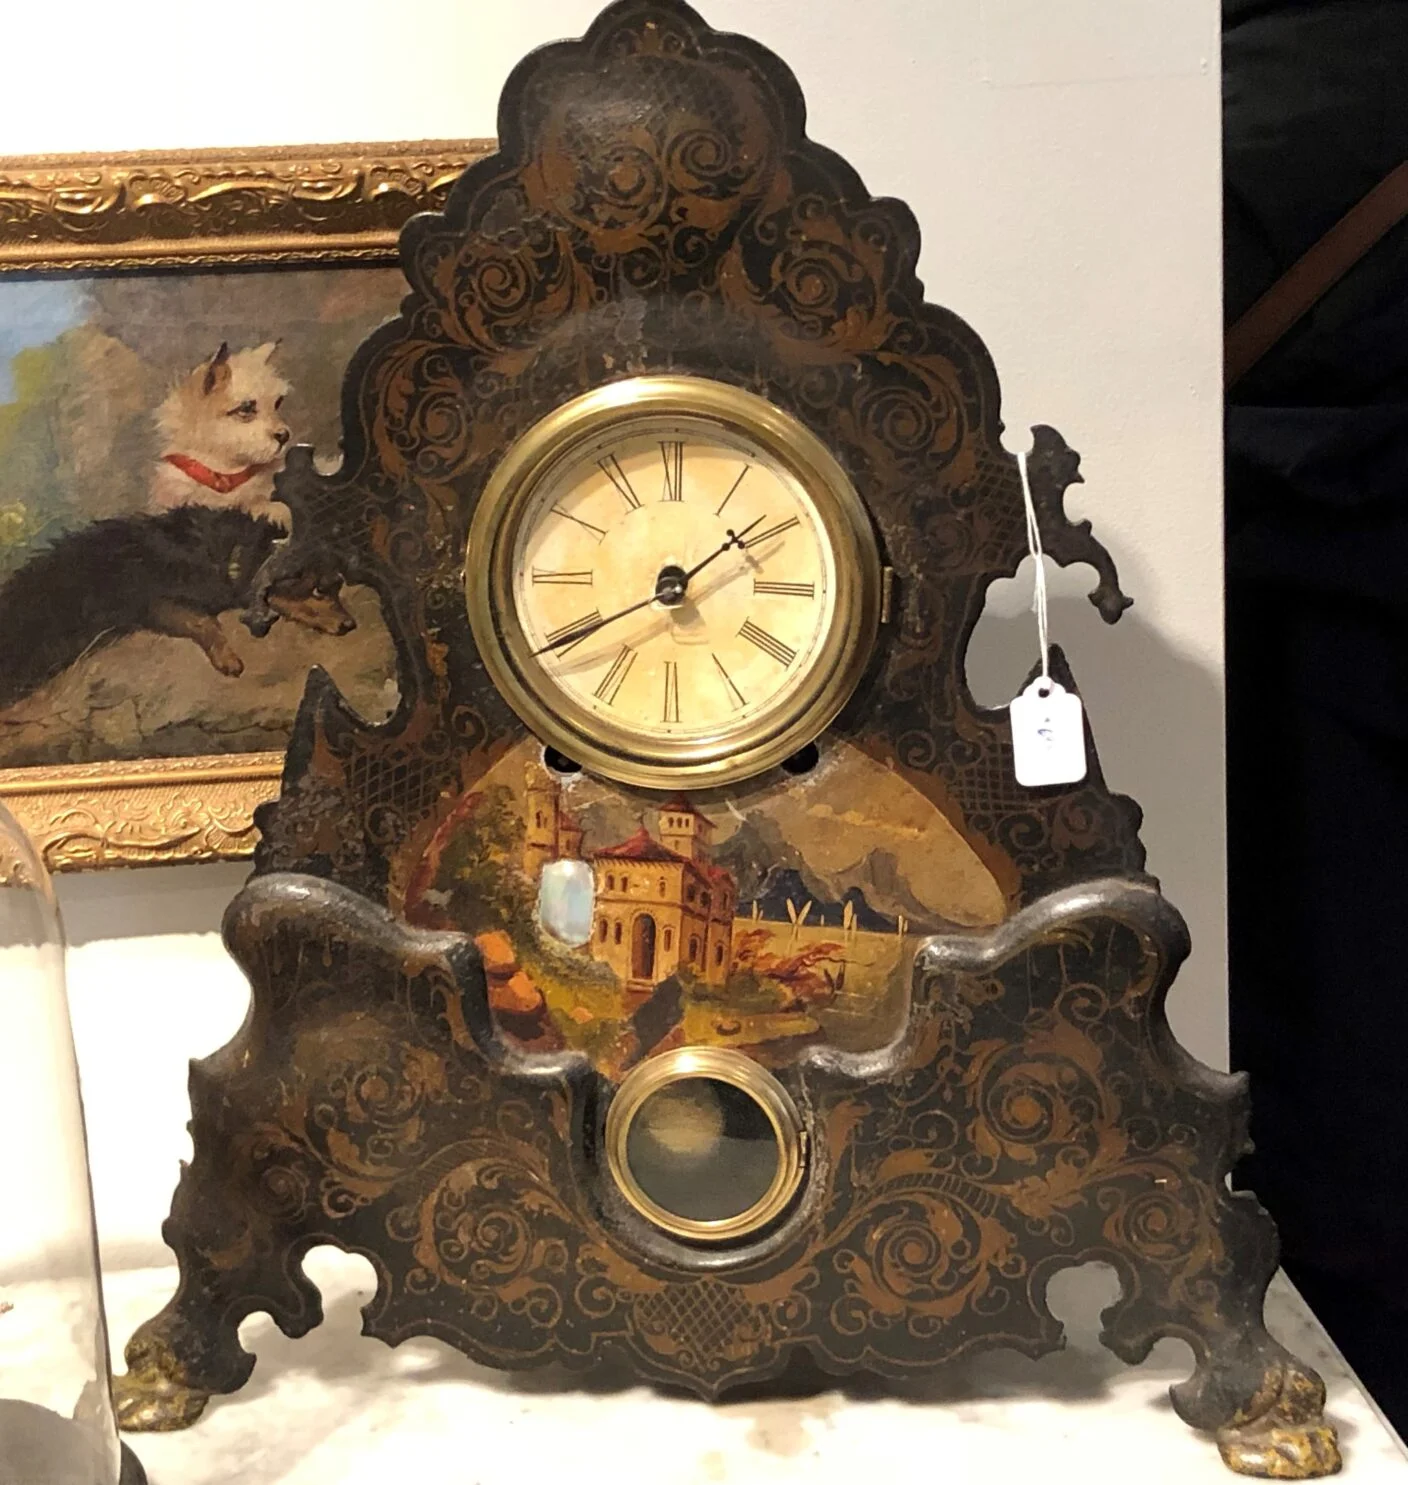 What style of clock do I have? – Antique and Vintage Clocks